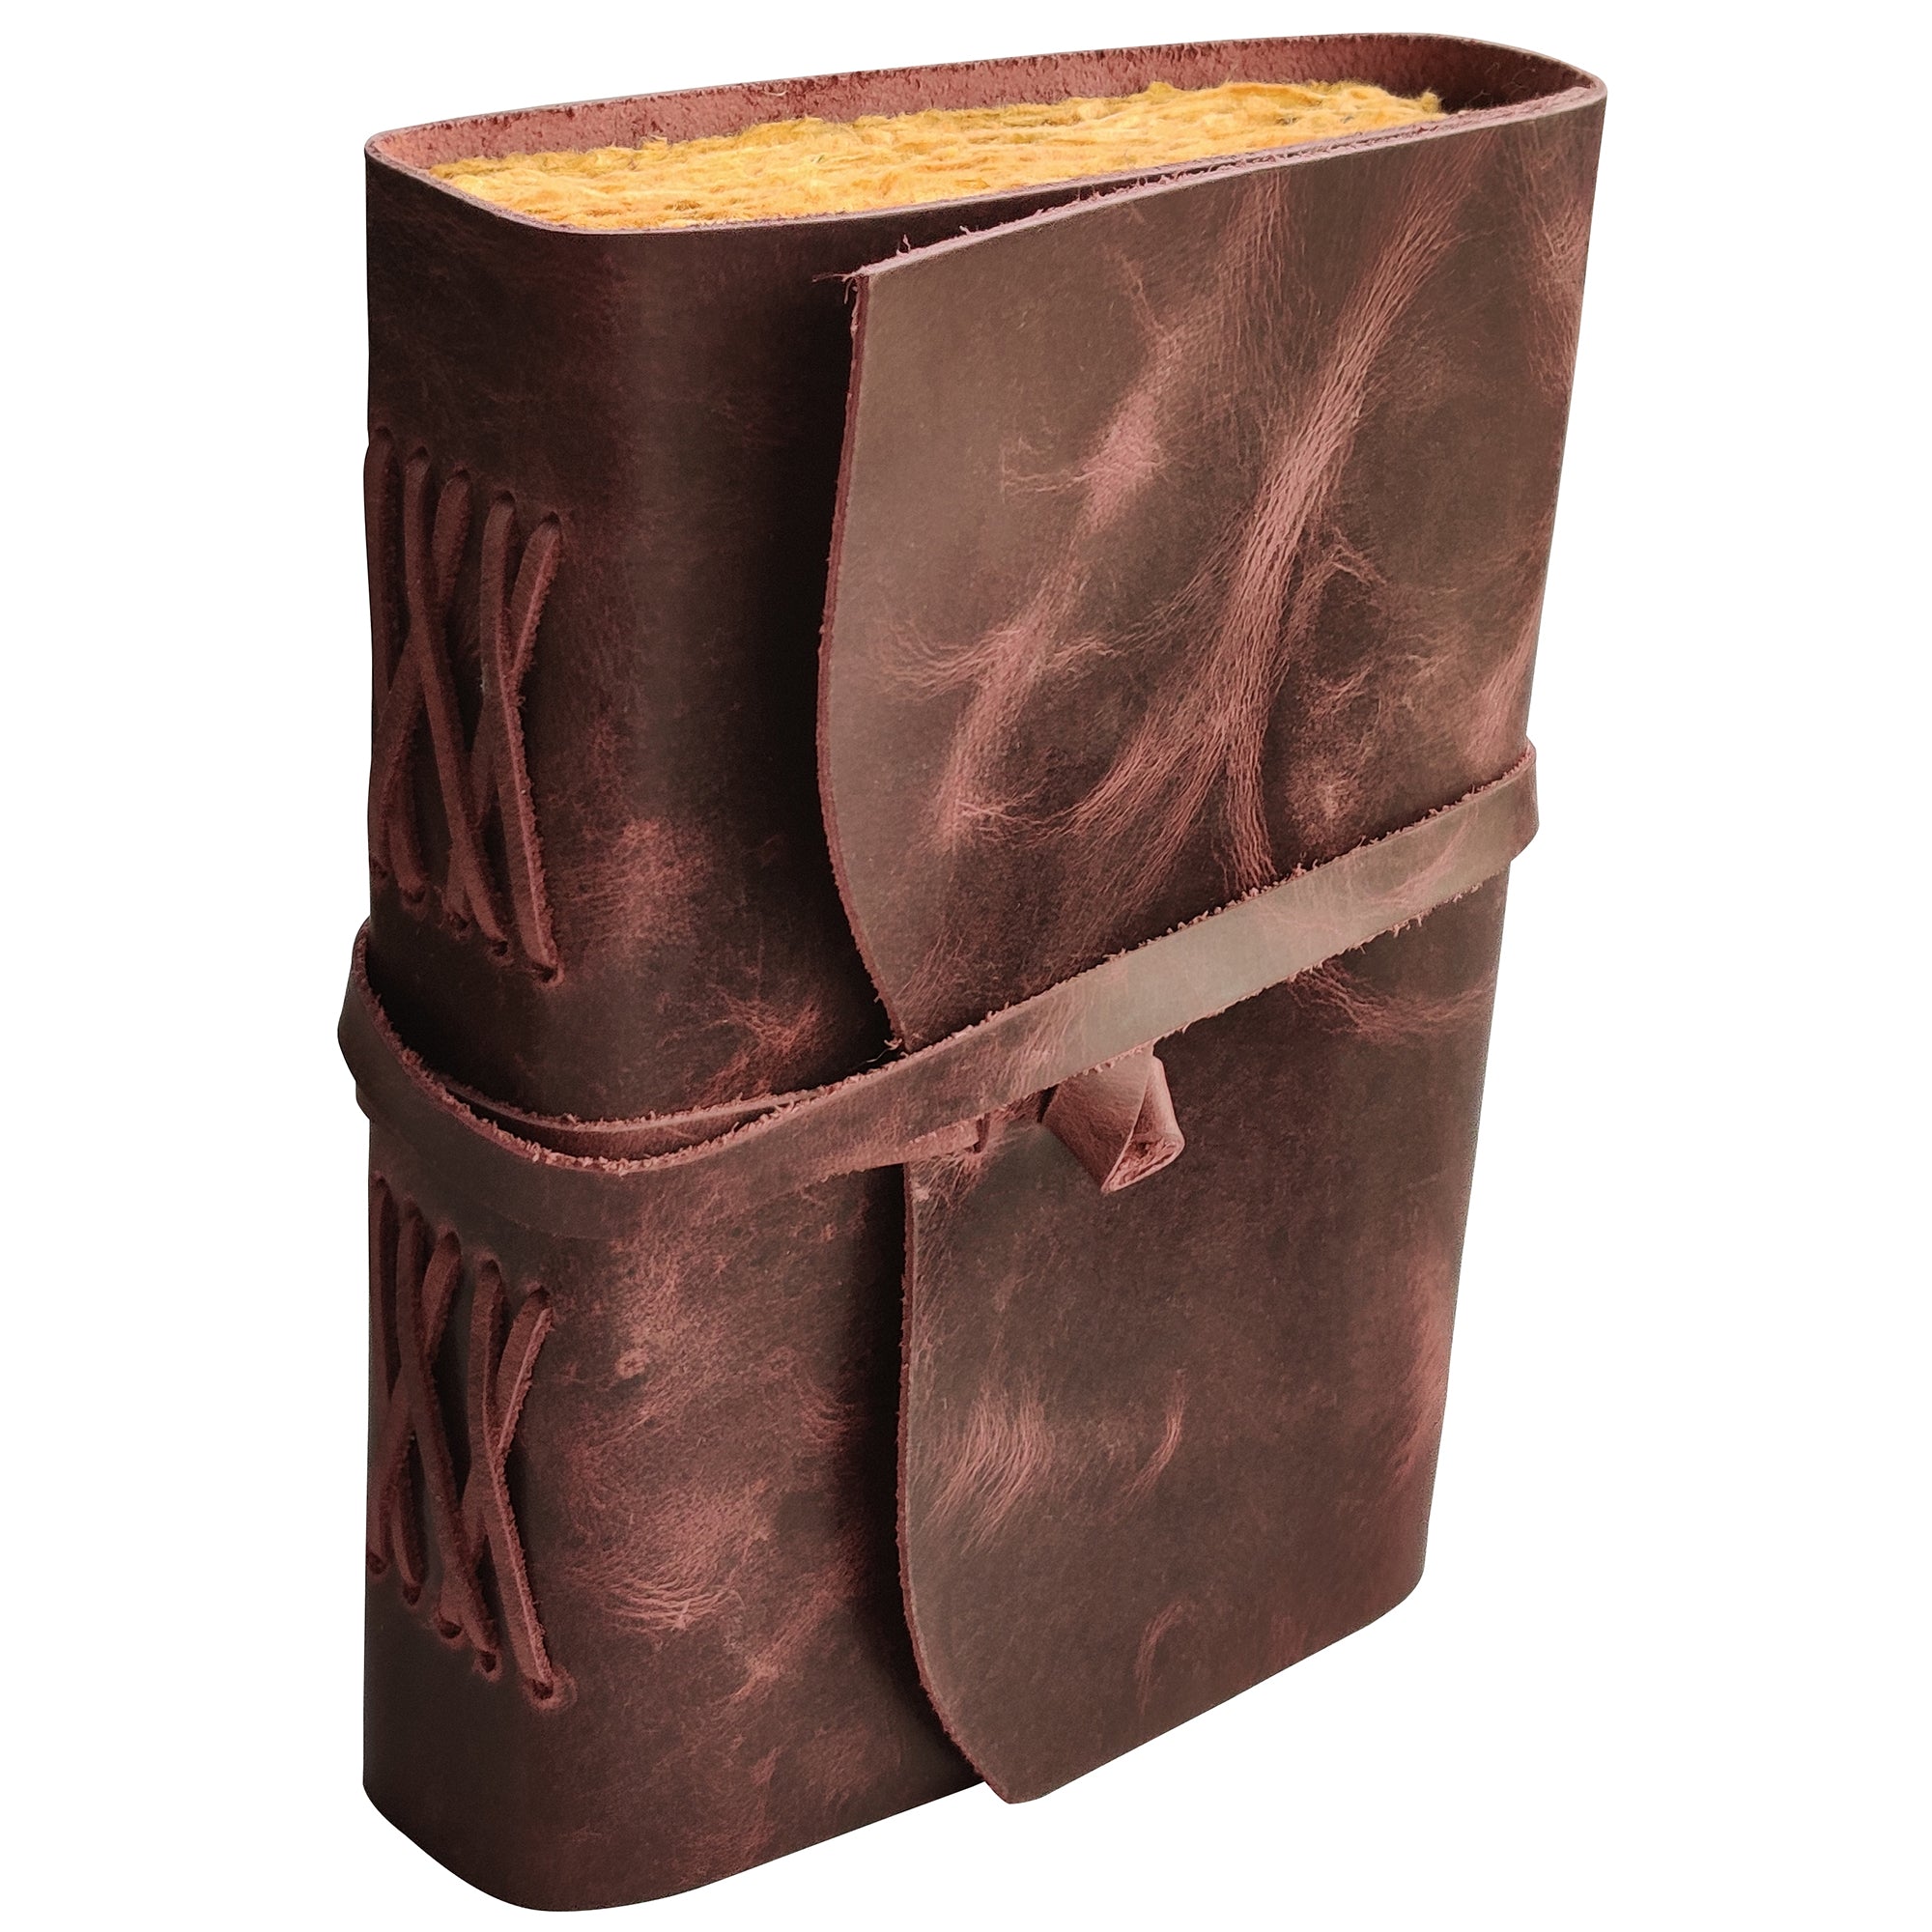 Genuine Leather Tool Roll Up Pouch- Handcrafted Tool Kit (10 Slots